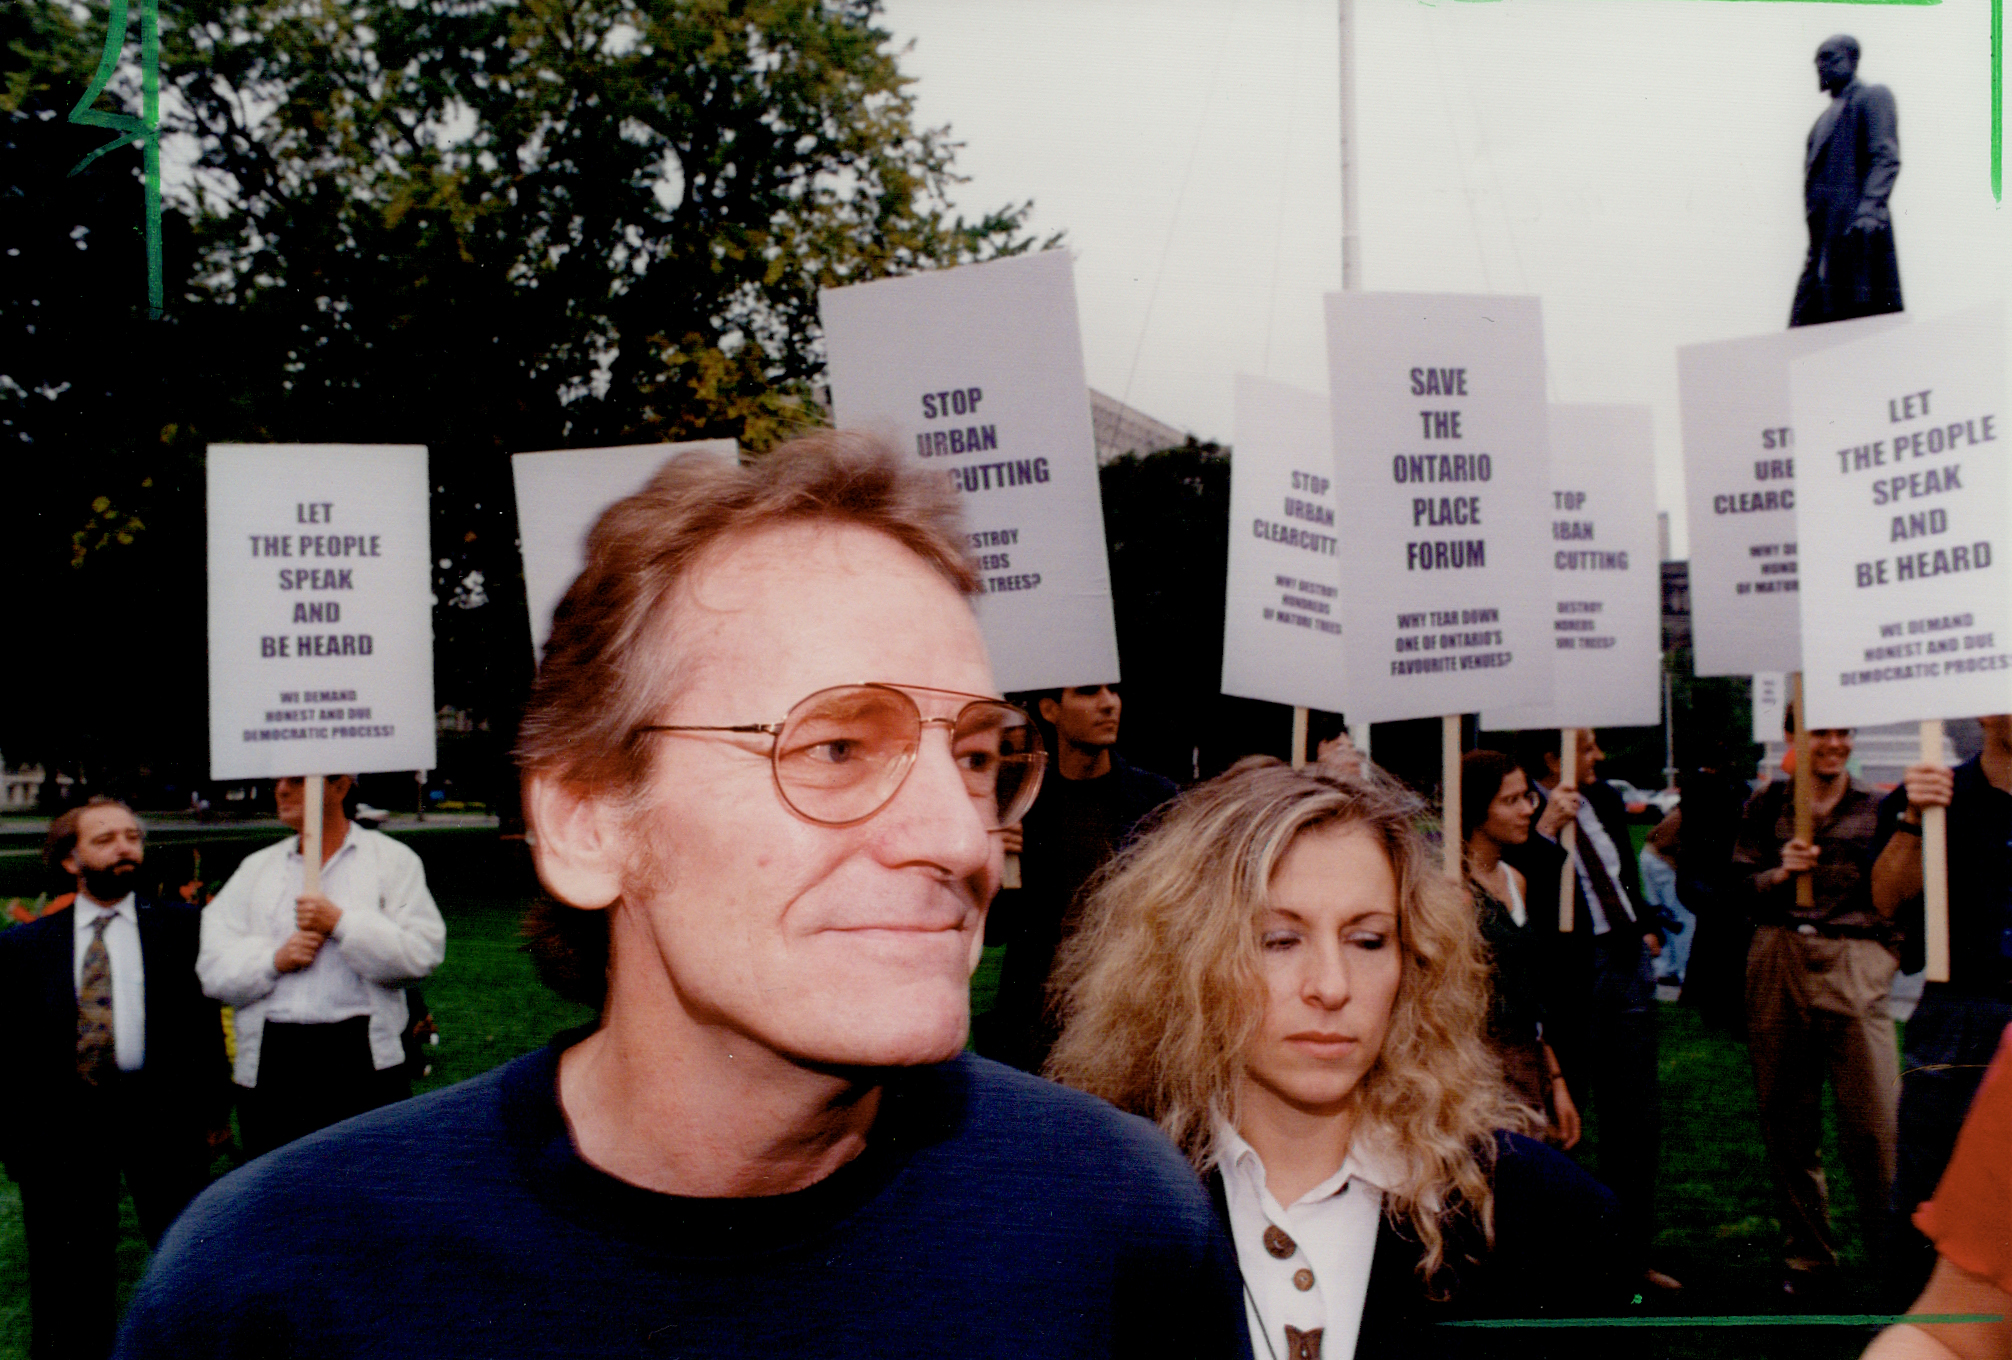 Gordon Lightfoot pictured with his second wife Elizabeth Moon at Queen's Park rally on September 14, 1994 in Canada | Source: Getty Images